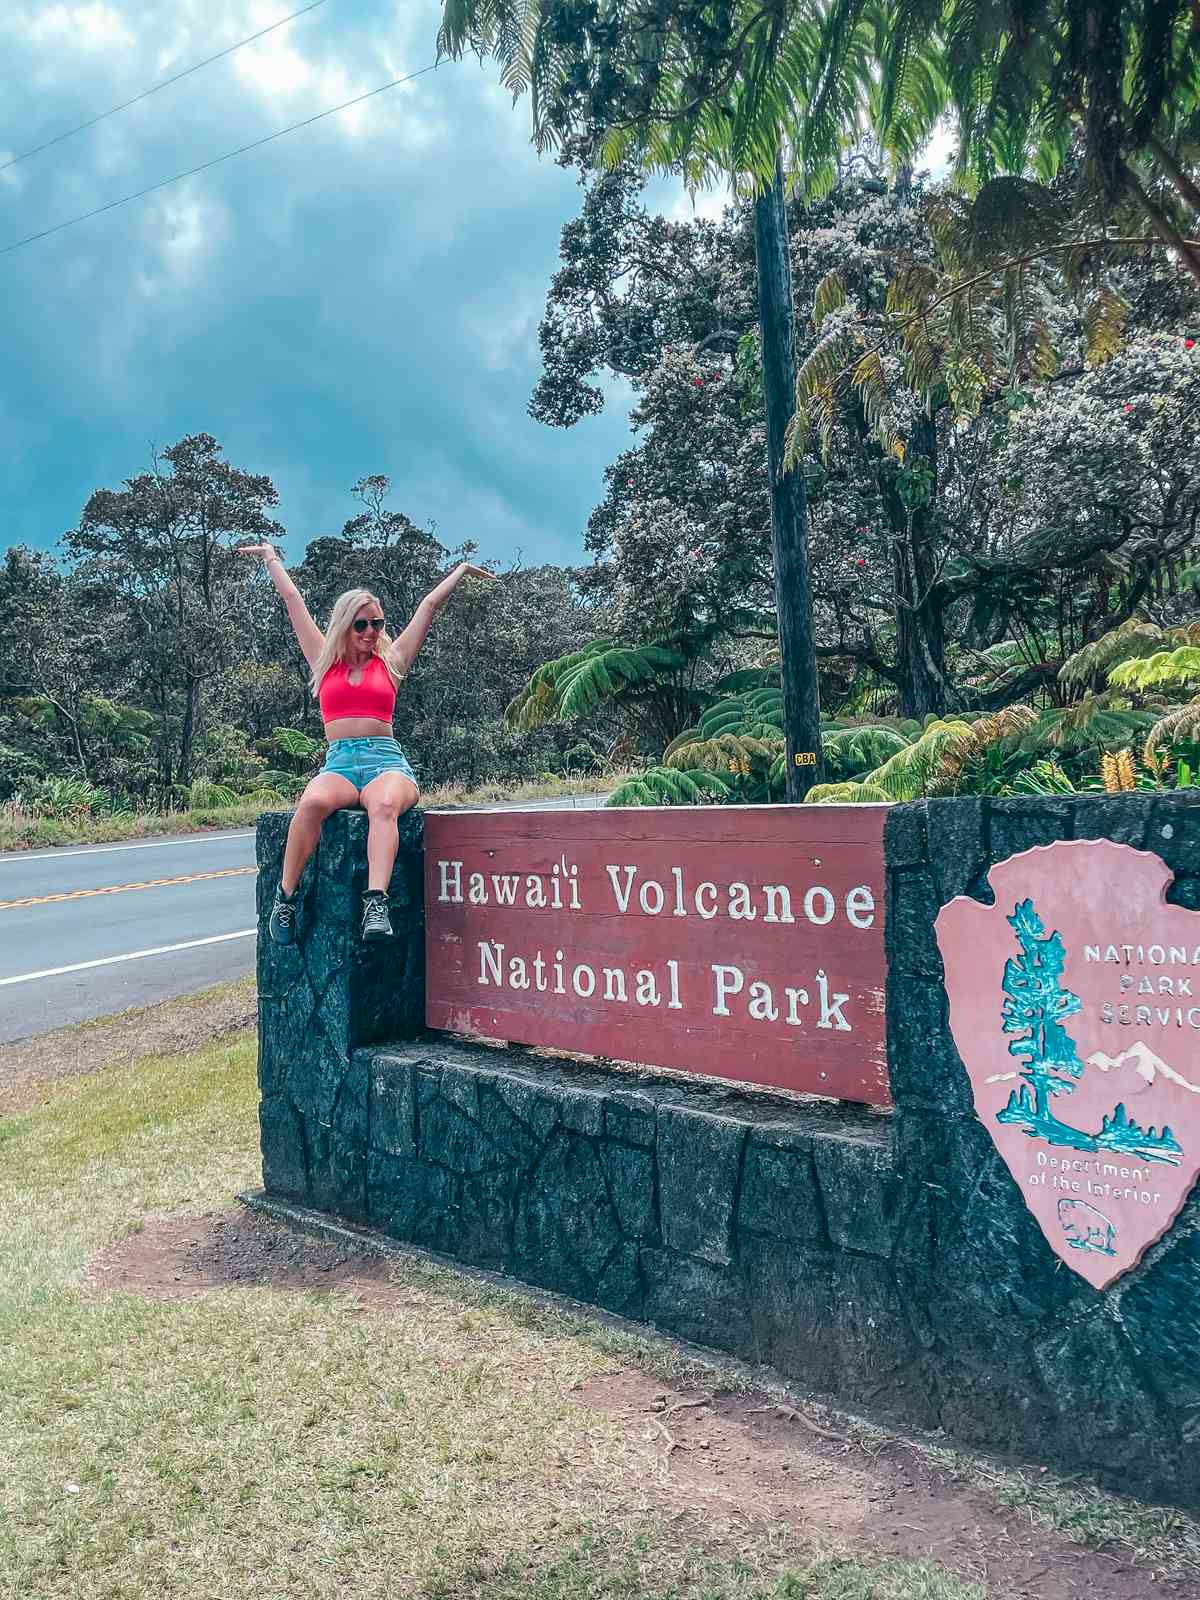 Hawaii Volcanoes National Park entry, a Big Island itinerary must